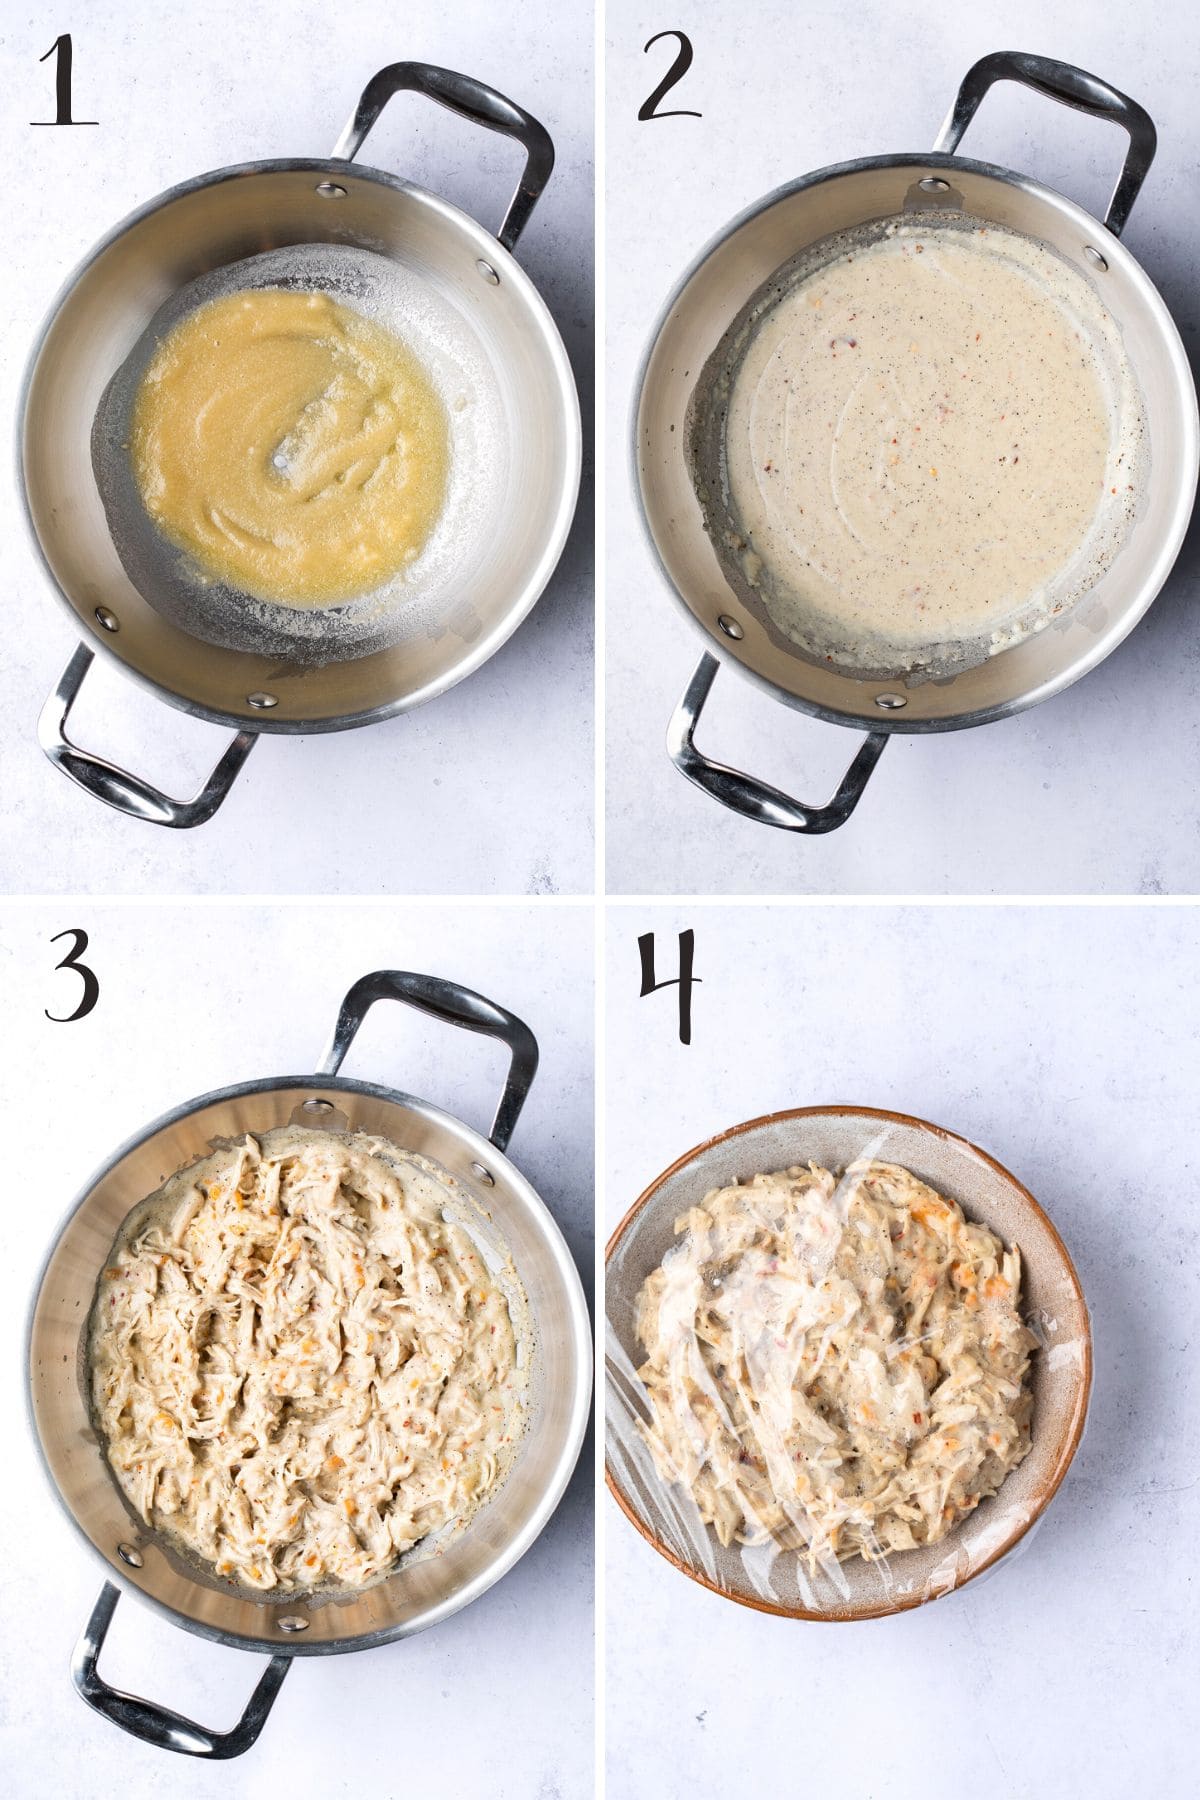 How to make the chicken filling - process